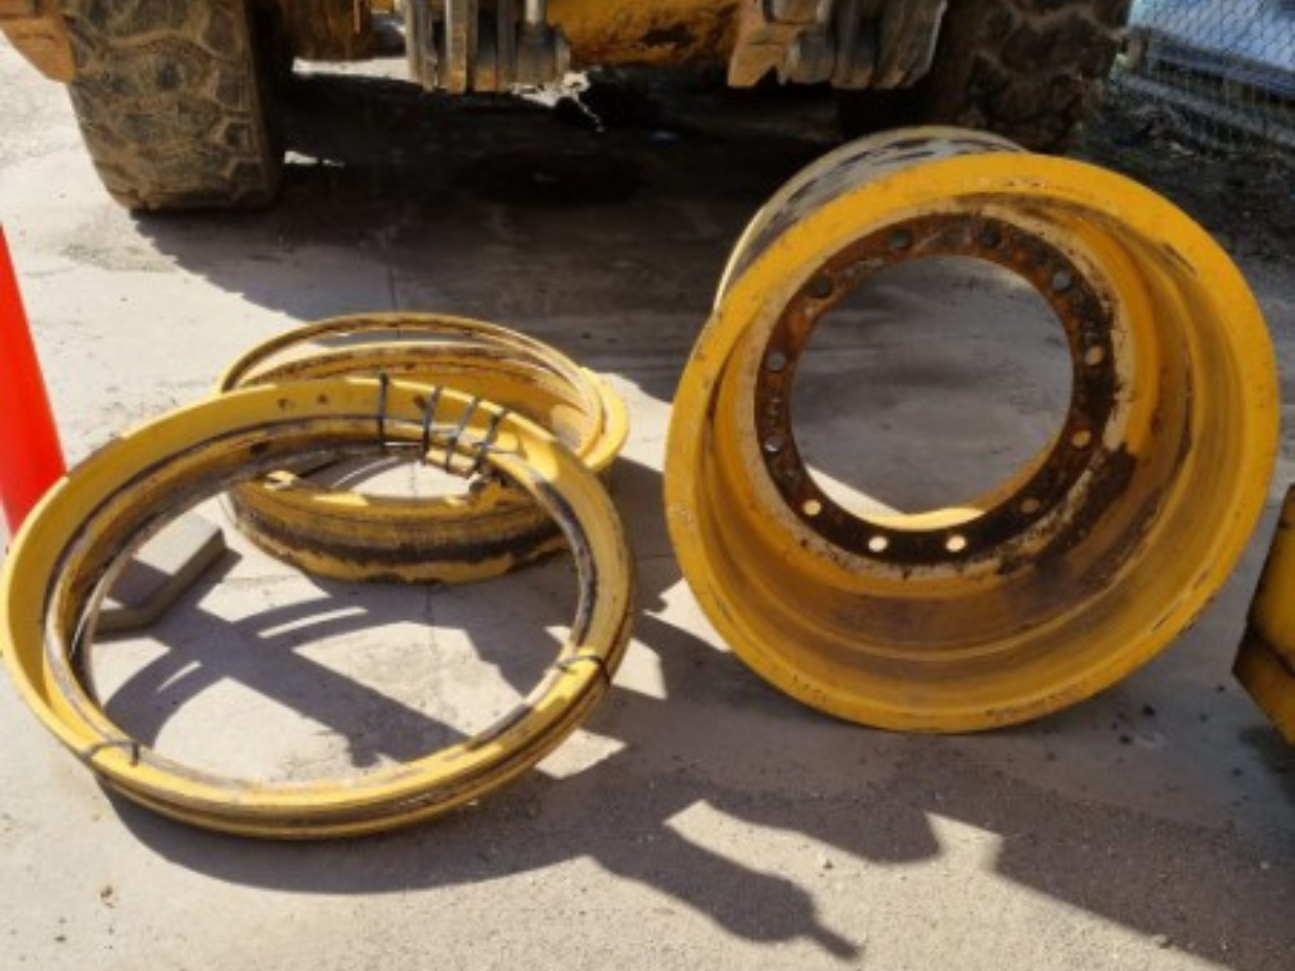 Image of Rims available for sale from HT Spares in our yard sale.